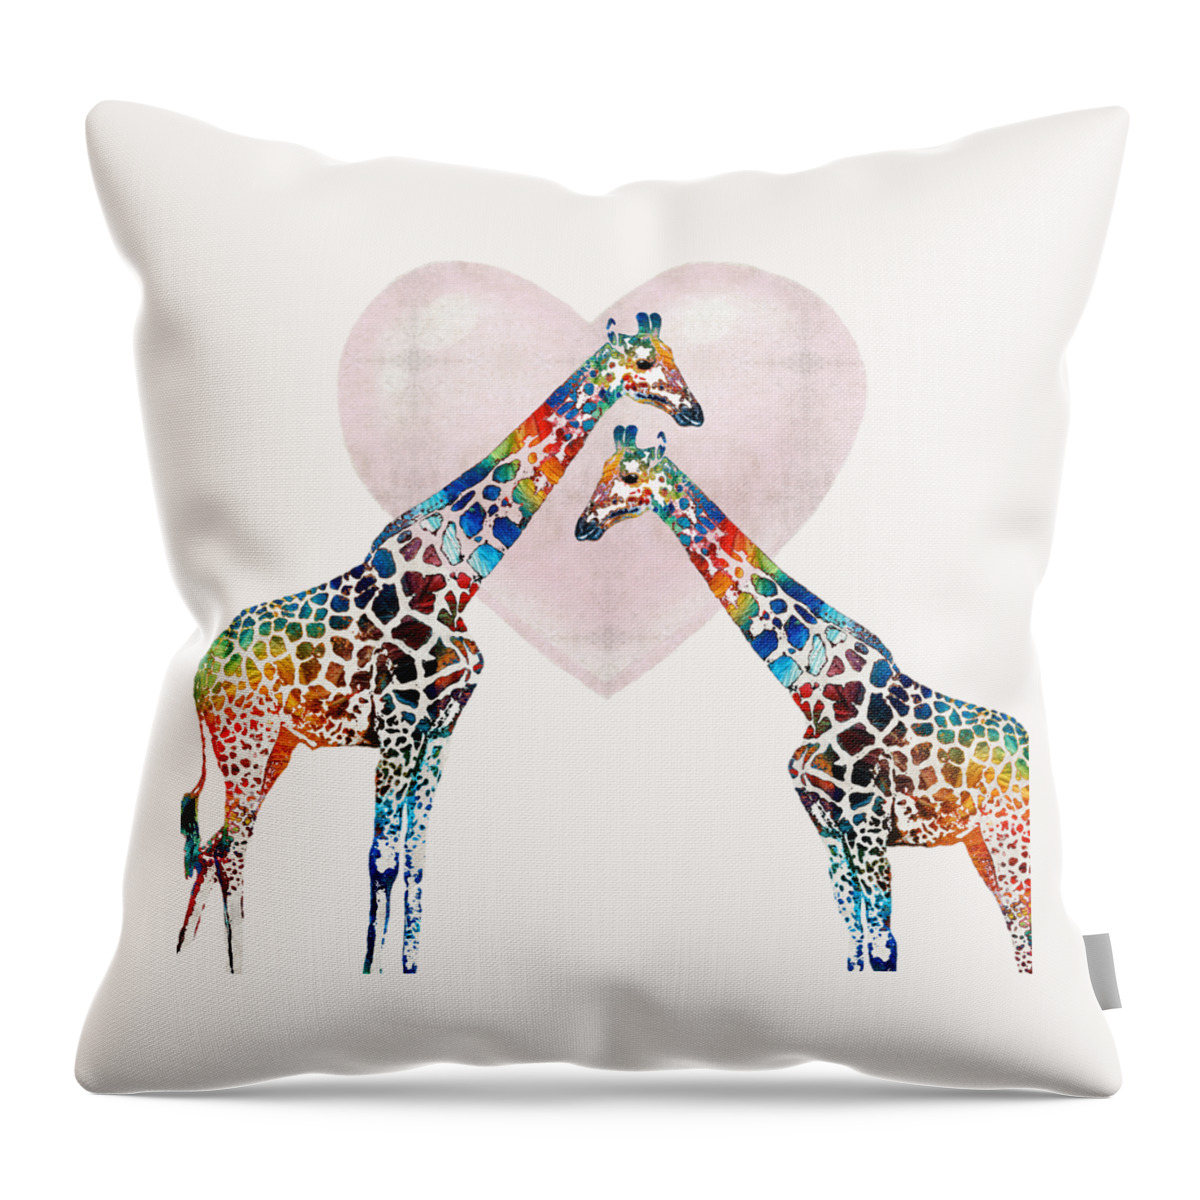 Giraffe Throw Pillow featuring the painting Colorful Giraffe Art - I've Got Your Back - By Sharon Cummings by Sharon Cummings